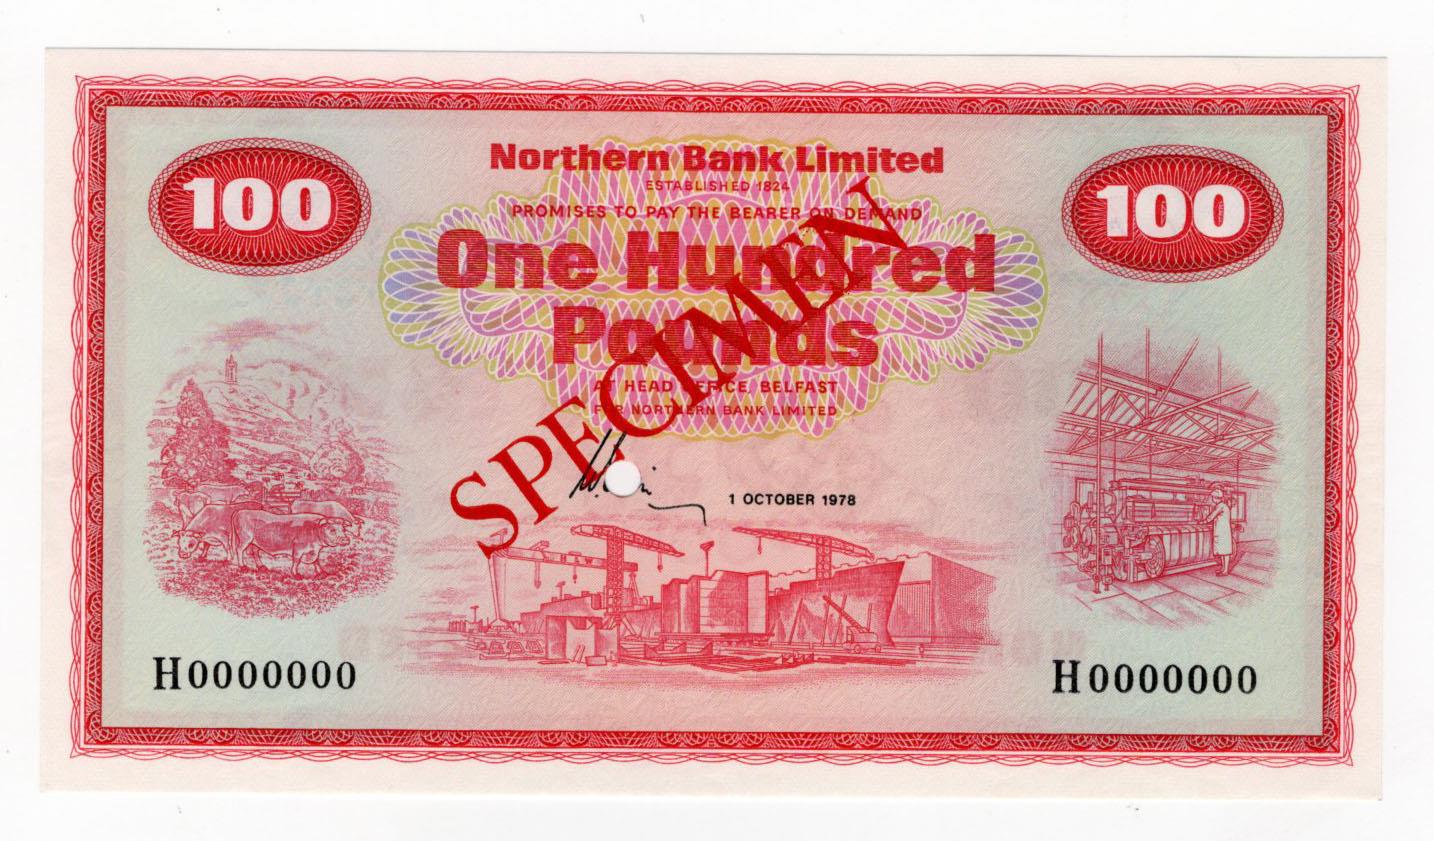 Northern Ireland, Northern Bank Limited 100 Pounds dated 1st October 1978, SPECIMEN note signed